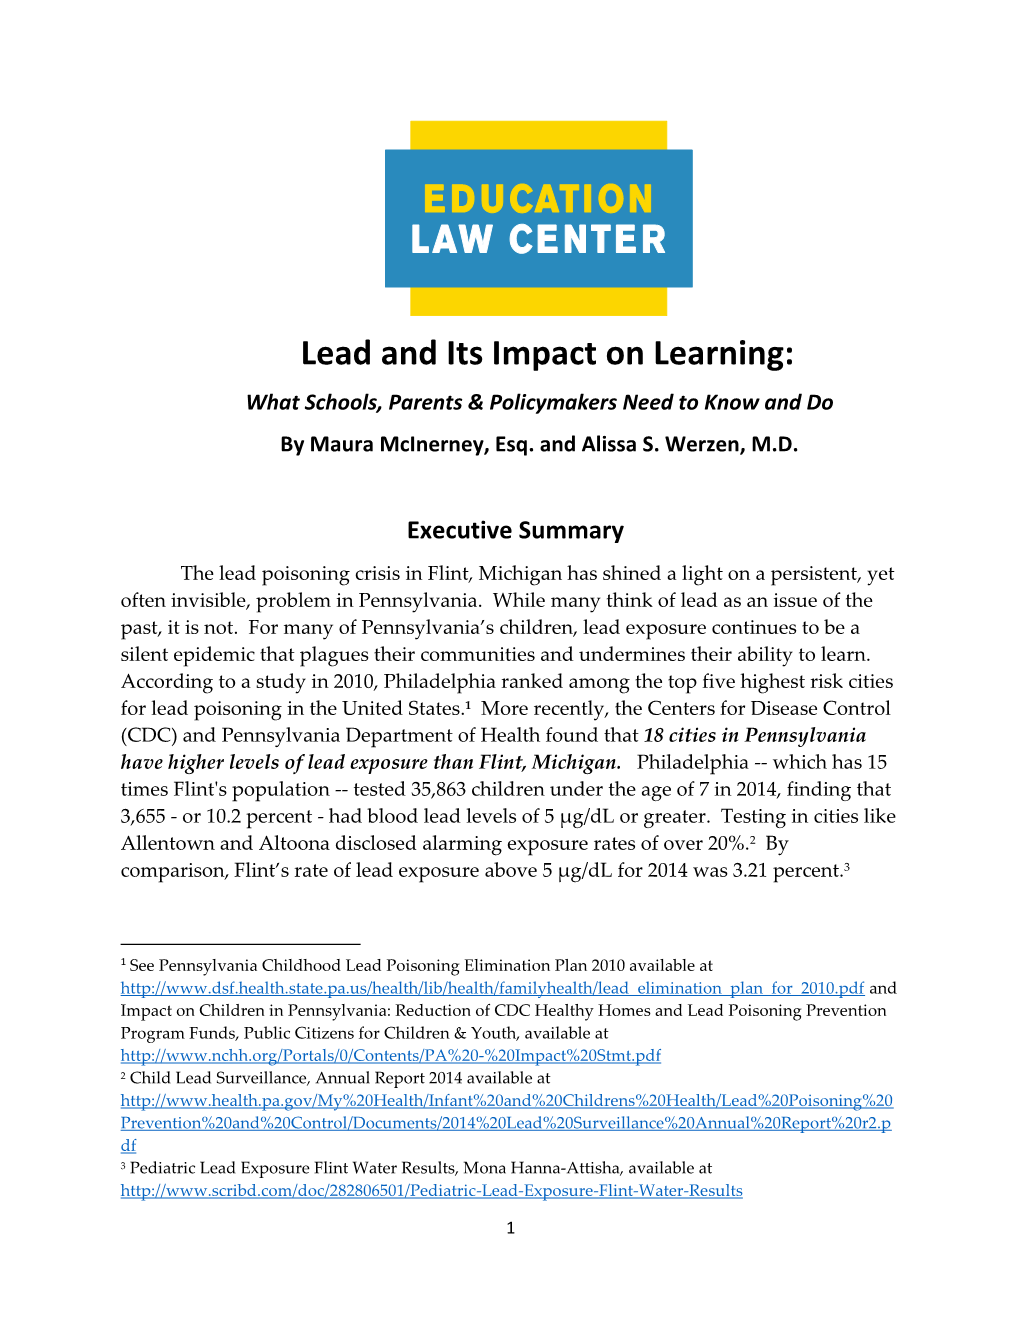 Lead and Its Impact on Learning: What Schools, Parents & Policymakers Need to Know and Do by Maura Mcinerney, Esq